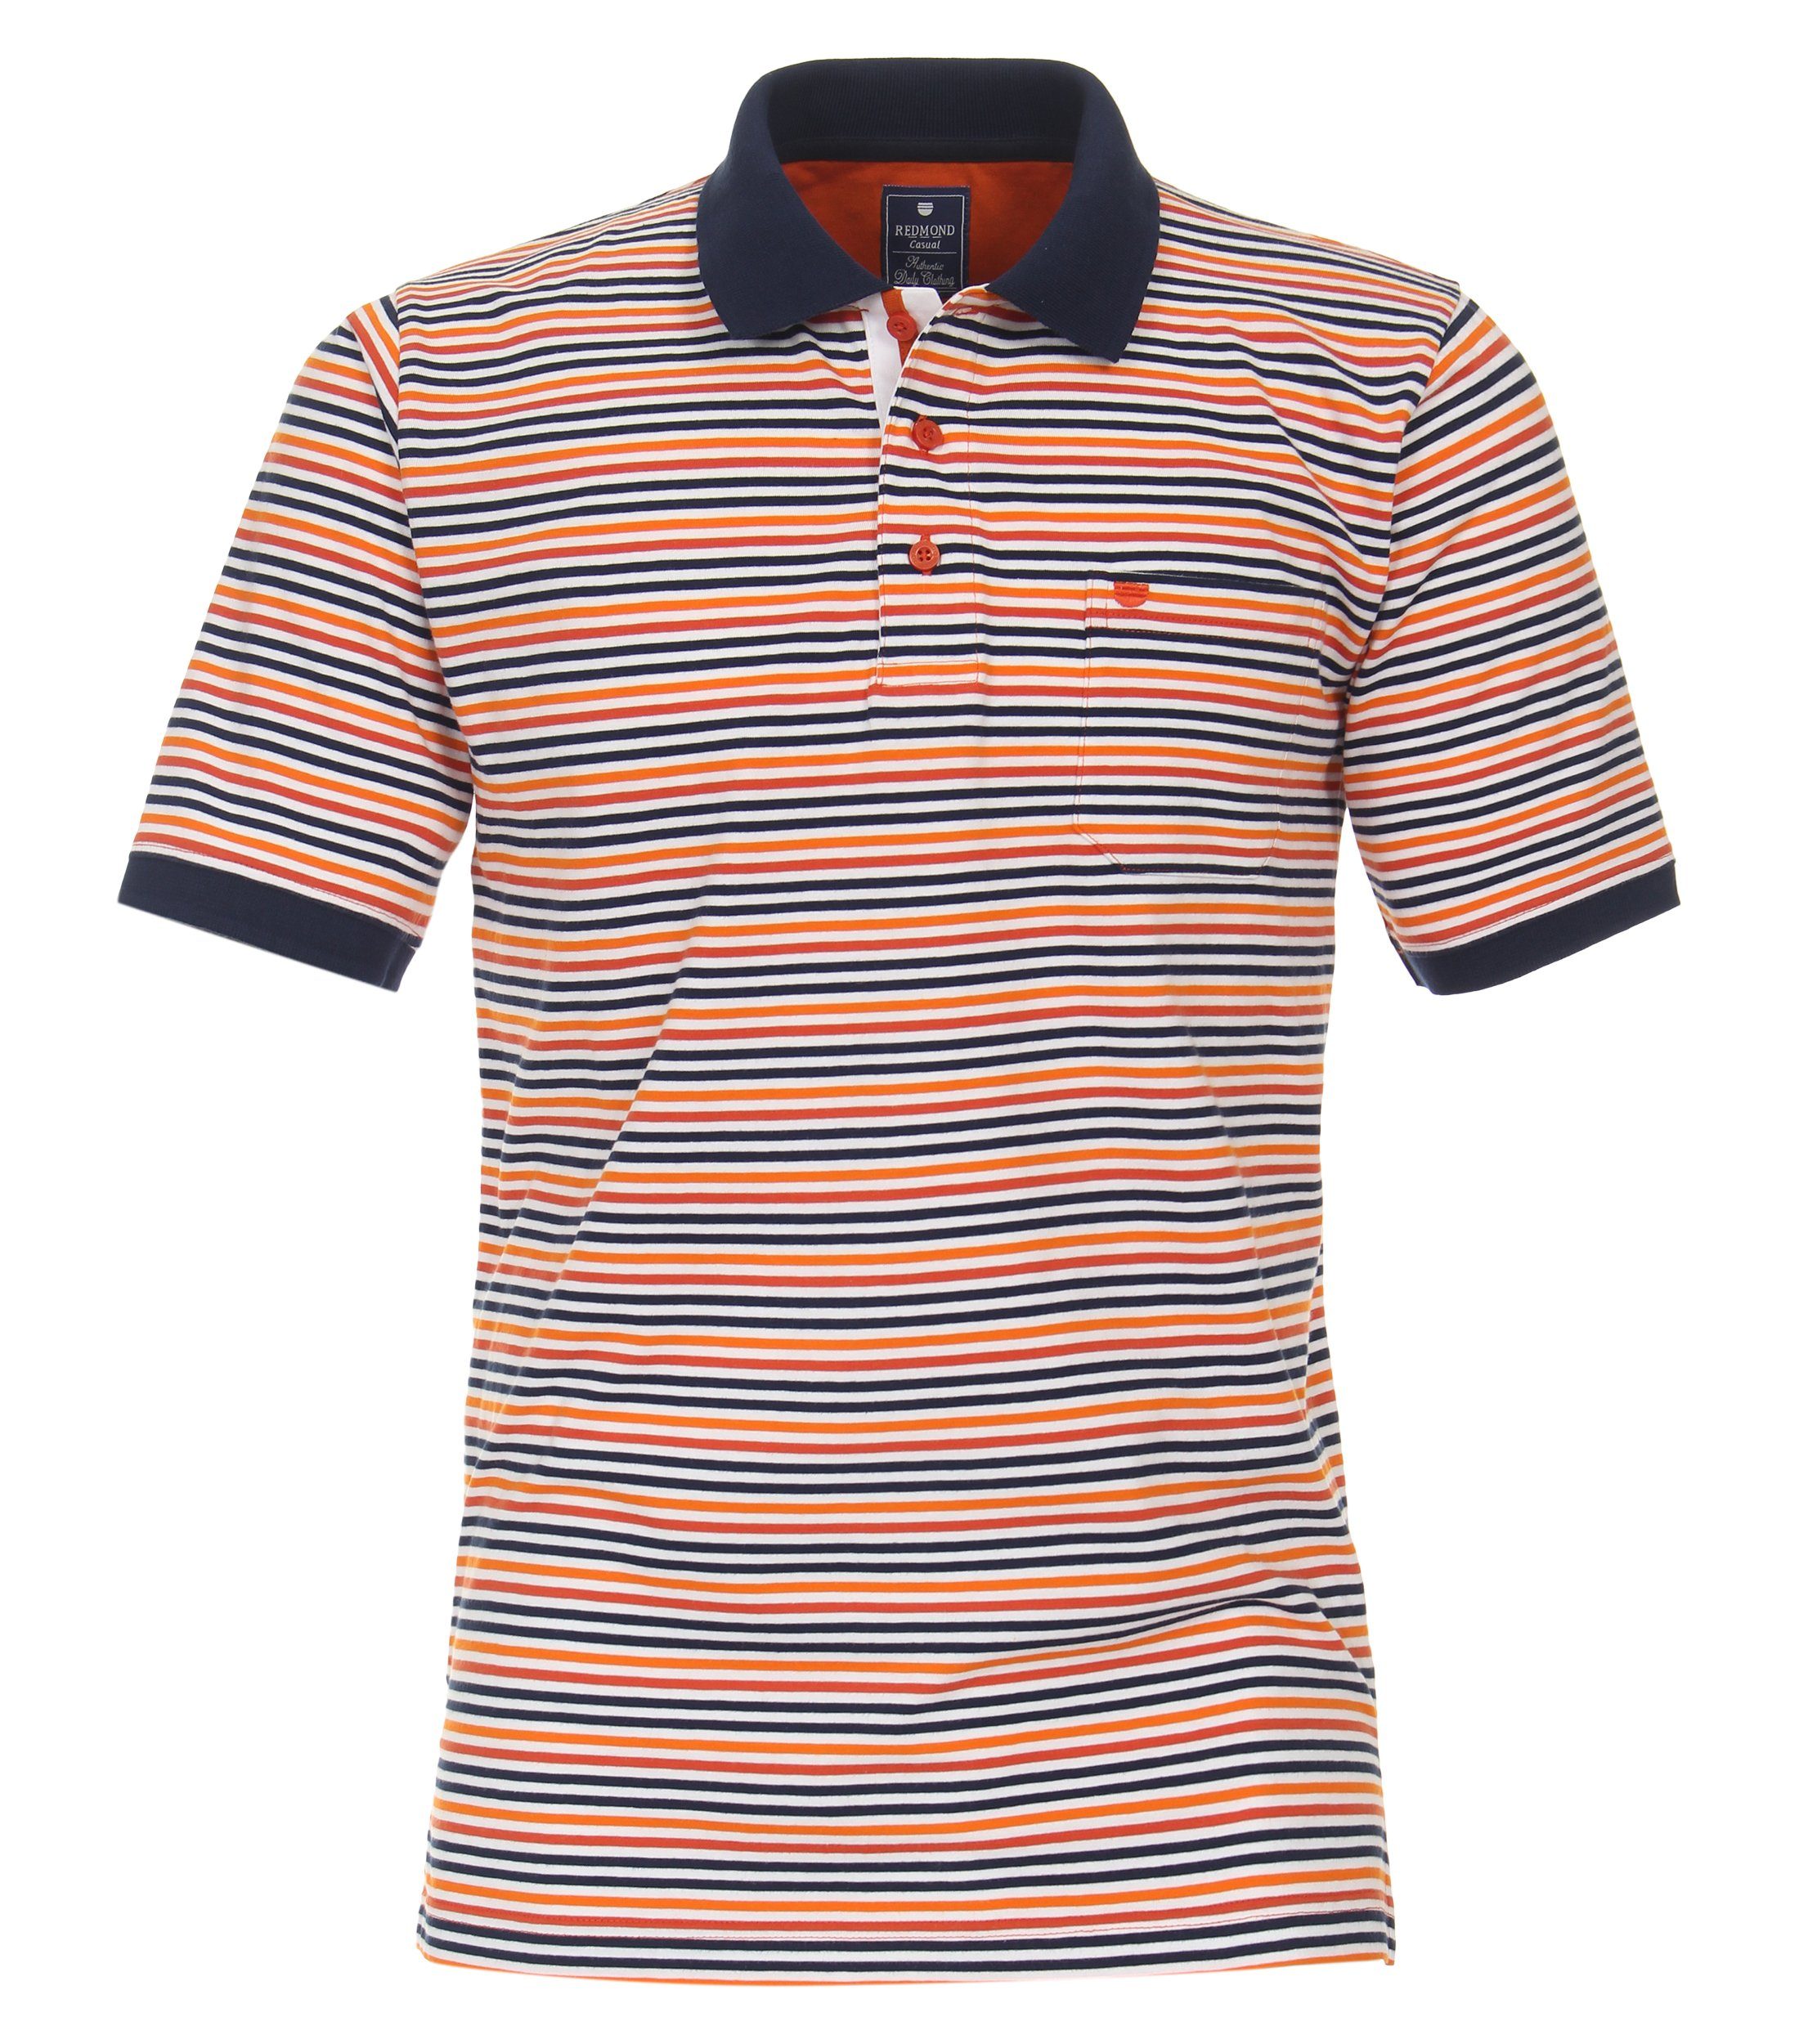 Muster Redmond 50 Poloshirt andere rot